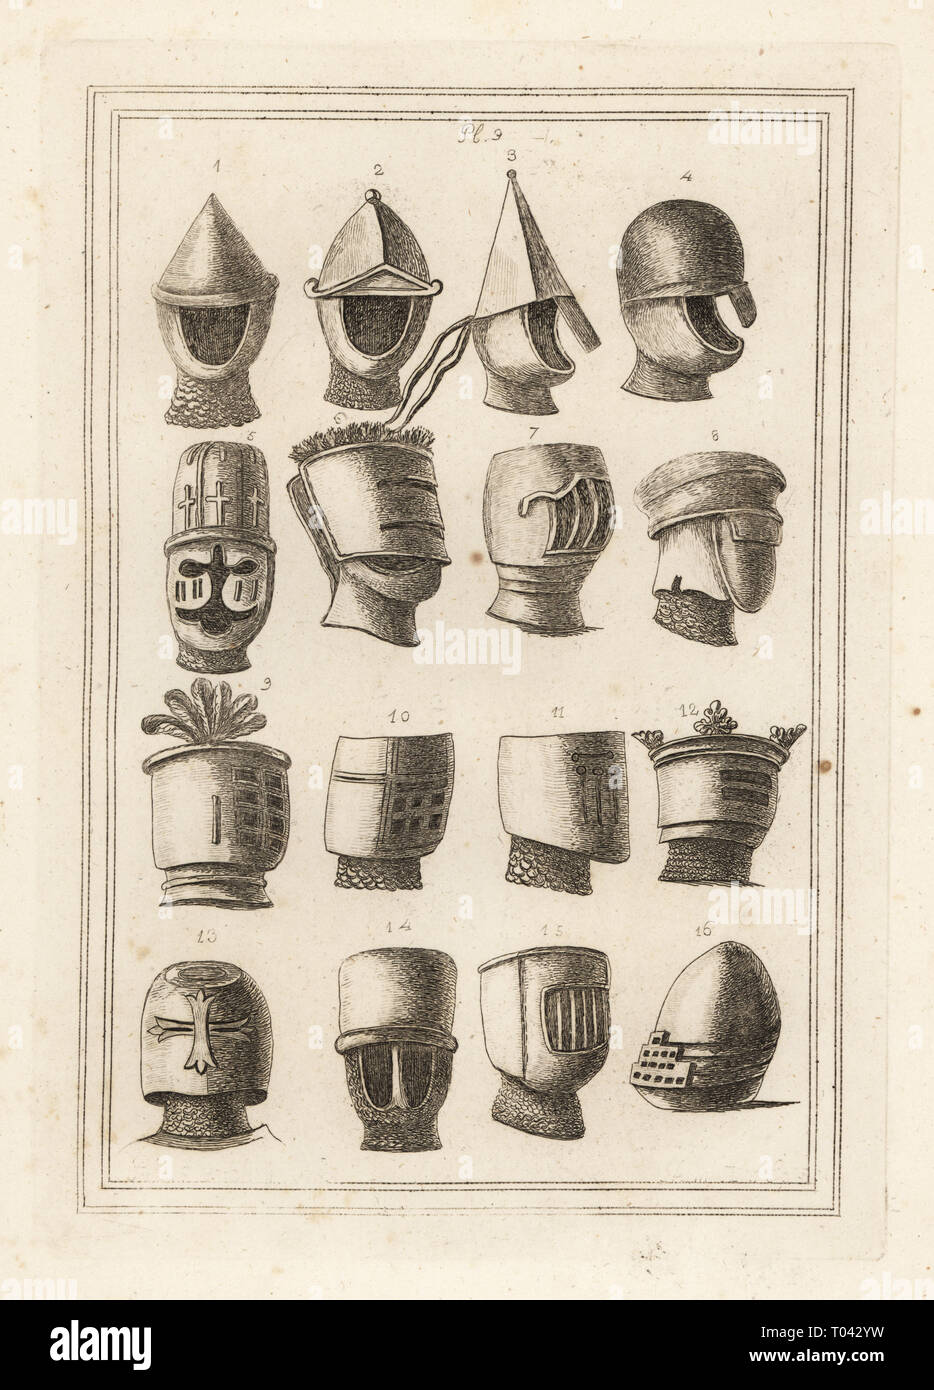 Helmets from the great seals of kings and barons. William the Conqueror 1,2, William Earl of Mellent 3, son of Richard I 4, Duke of Normandy 5, Richard I 6,  Ferdinand III 7, Alexander II 8, Alexander III 9, John Earl Warren 10, Robert de Ghisnes 11, King Edward I 12, Hughes Vidame de Chalons 13, Raoul de Beaumont 14, Earl of Cornwall 15 and Edward III’s son Edward 16. Copperplate engraving from Francis Grose's Military Antiquities respecting a History of the English Army, Stockdale, London, 1812. Stock Photo